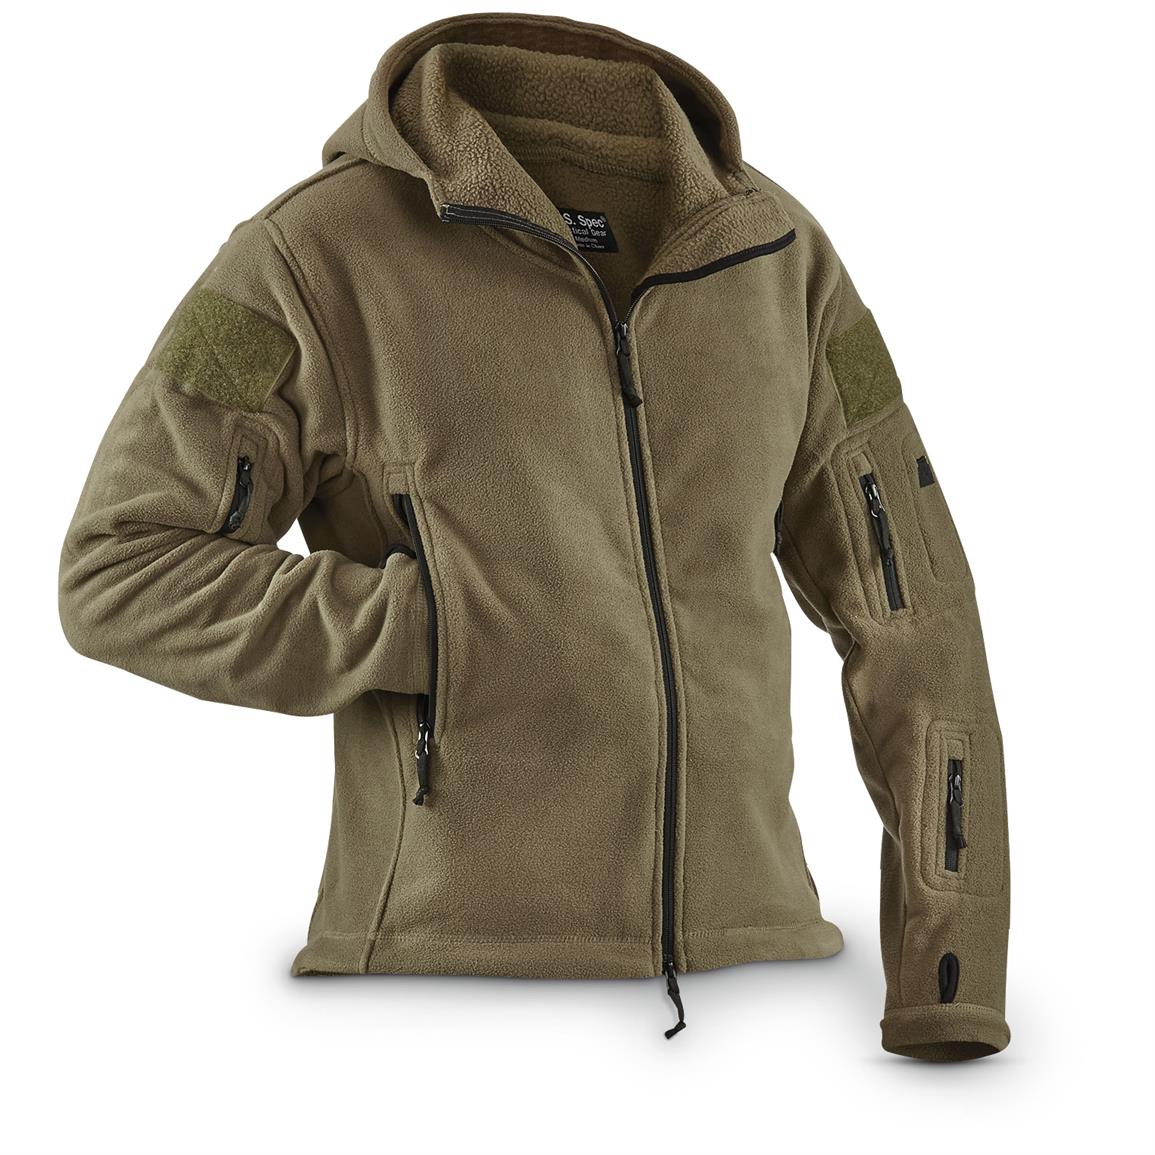 U.S. Spec Heavyweight Hooded Fleece Jacket 641091, Tactical Clothing at Sportsman's Guide